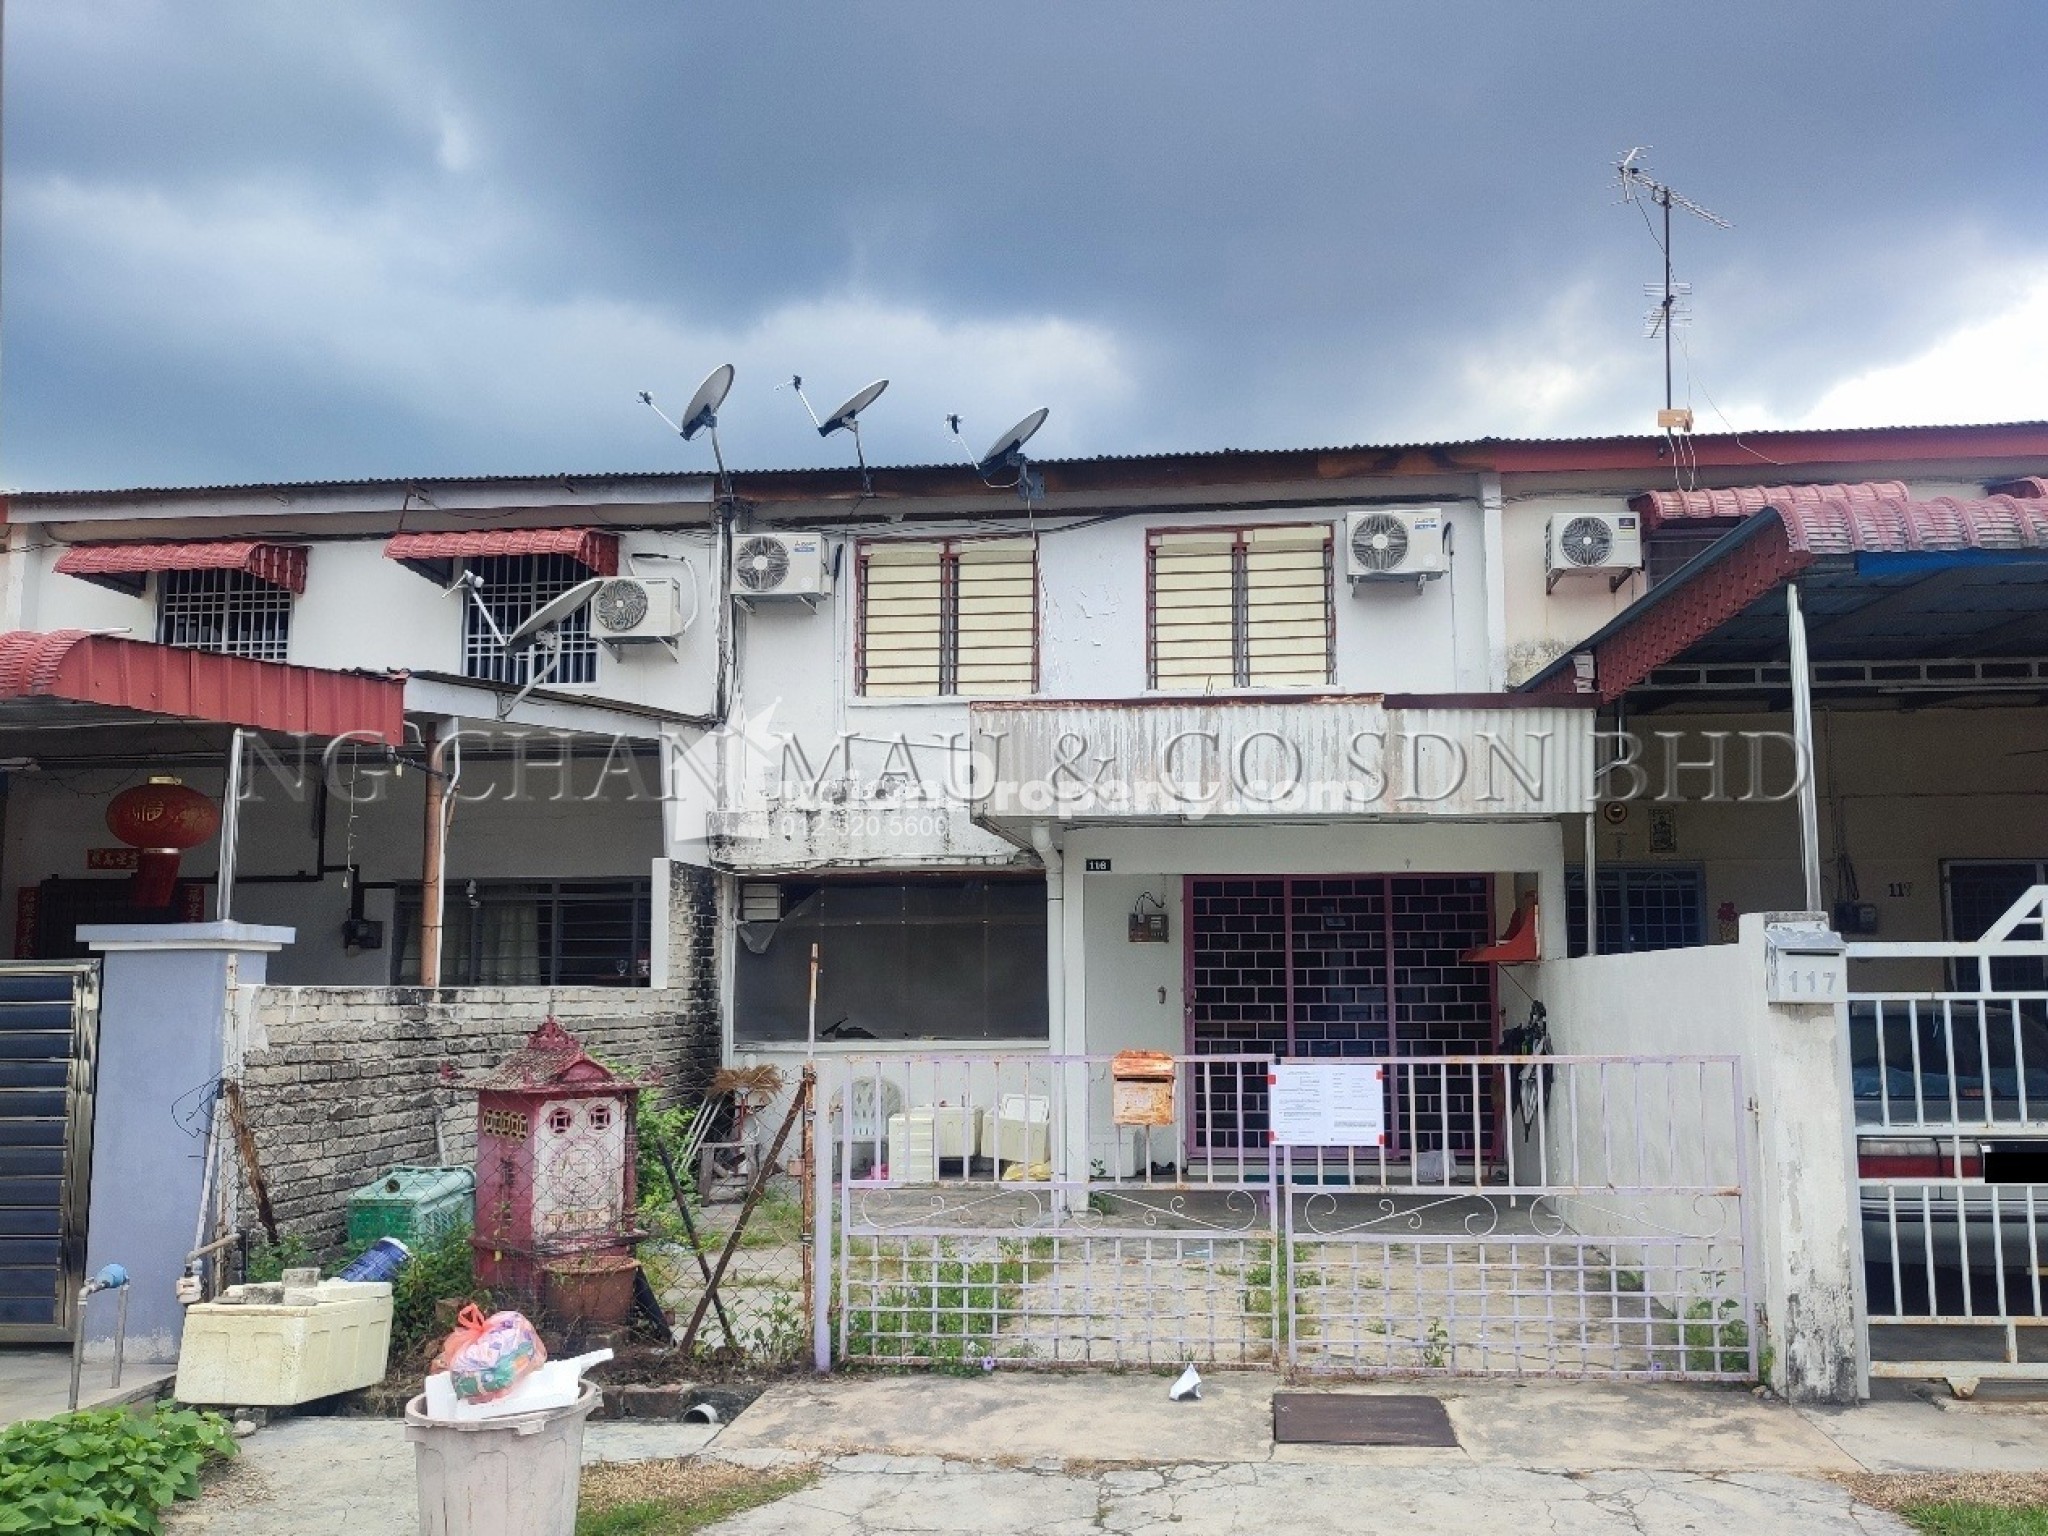 Terrace House For Auction at Taman Bintang